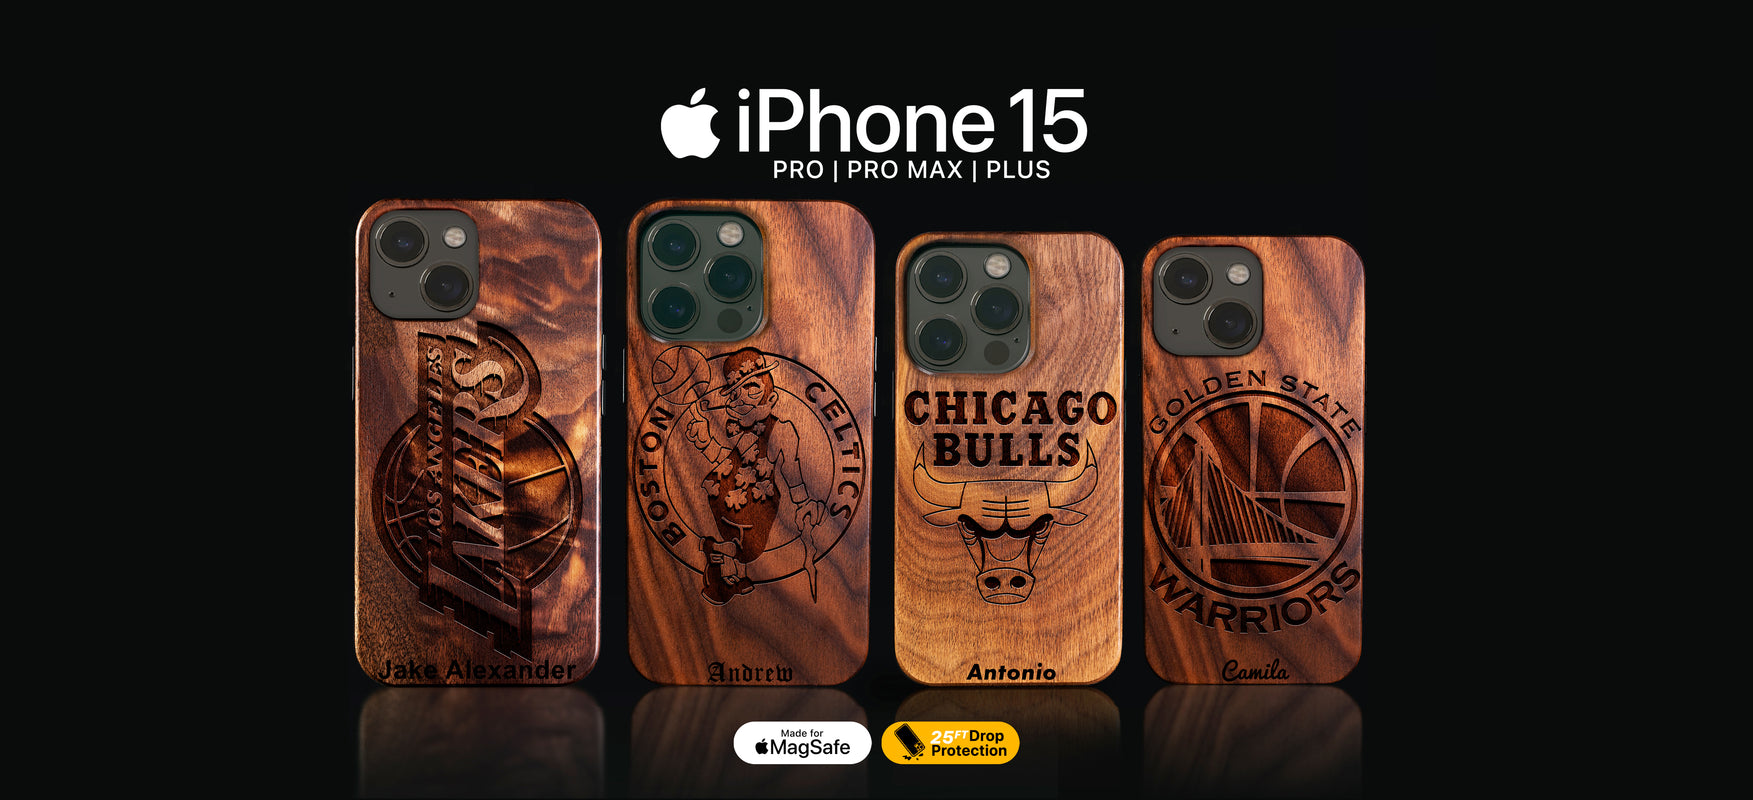 Personalized NBA Basketball iPhone 15, iPhone 15 Pro, iPhone 15 Pro Max, iPhone 15 Plus Cases Customized NBA Basketball Gifts For Fan MagSafe NBA iPhone Covers 2023 Christmas Gifts